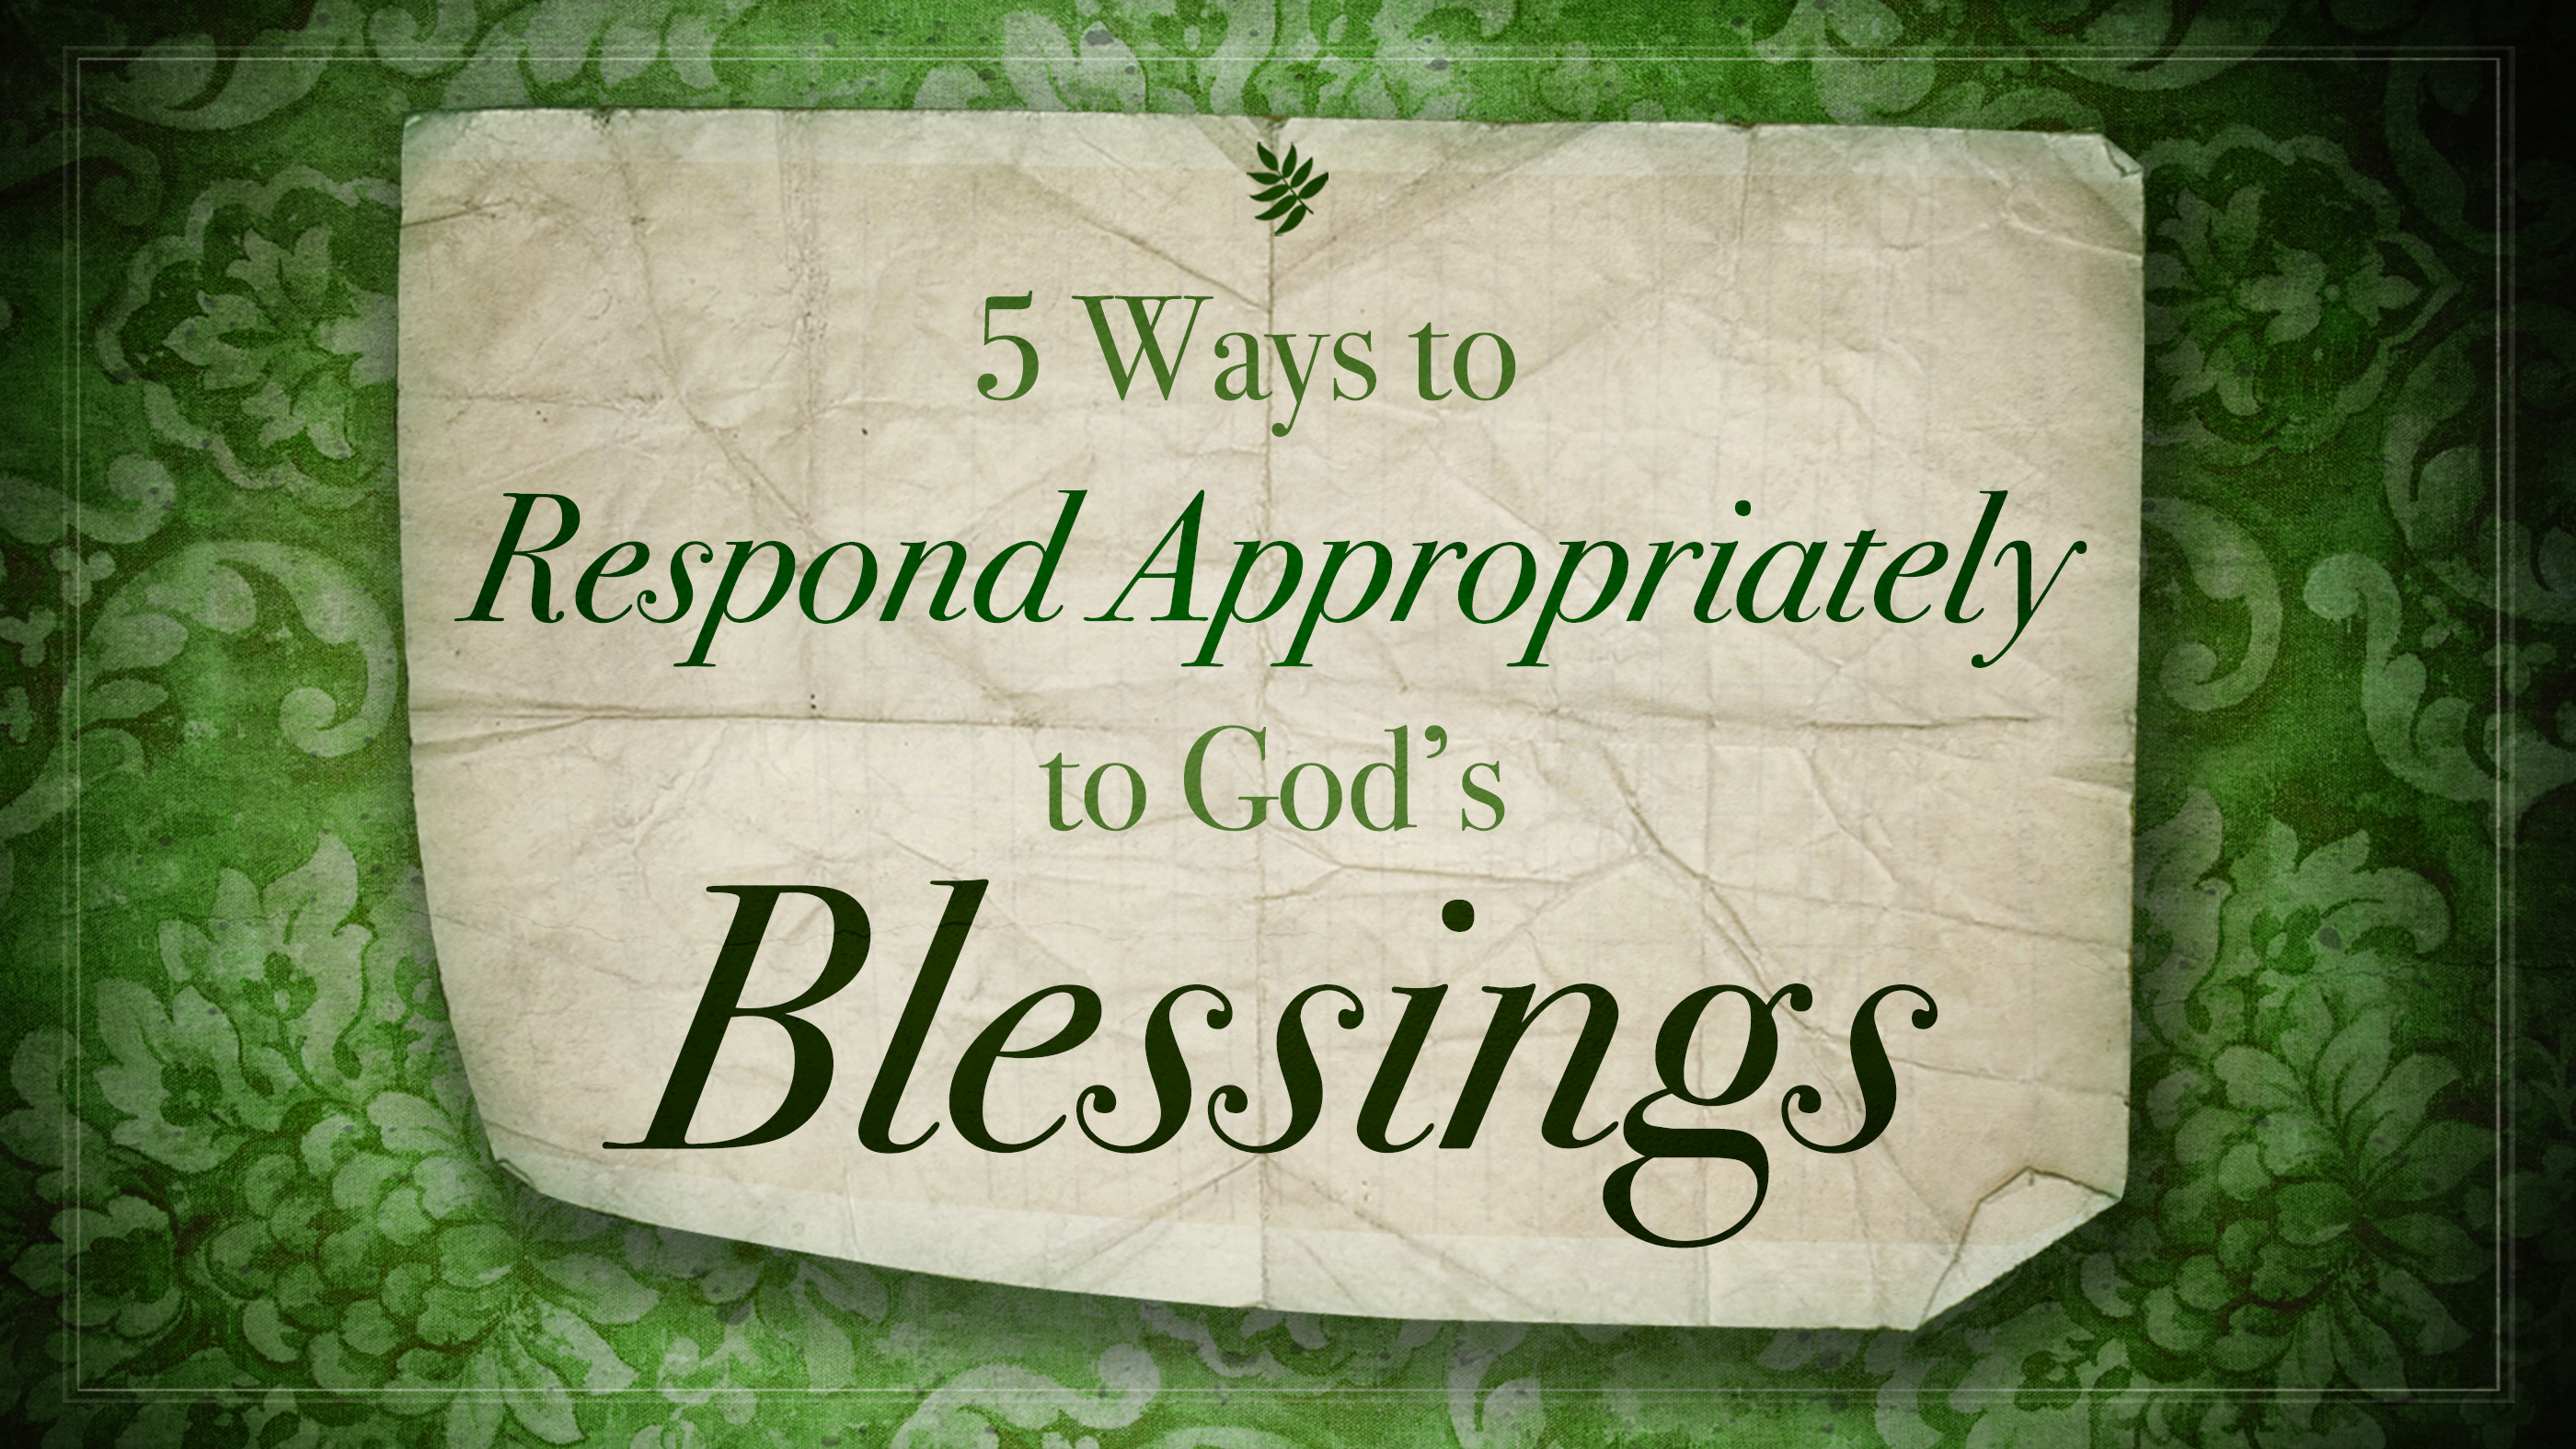 5 ways to Respond Appropriately to God’s blessings